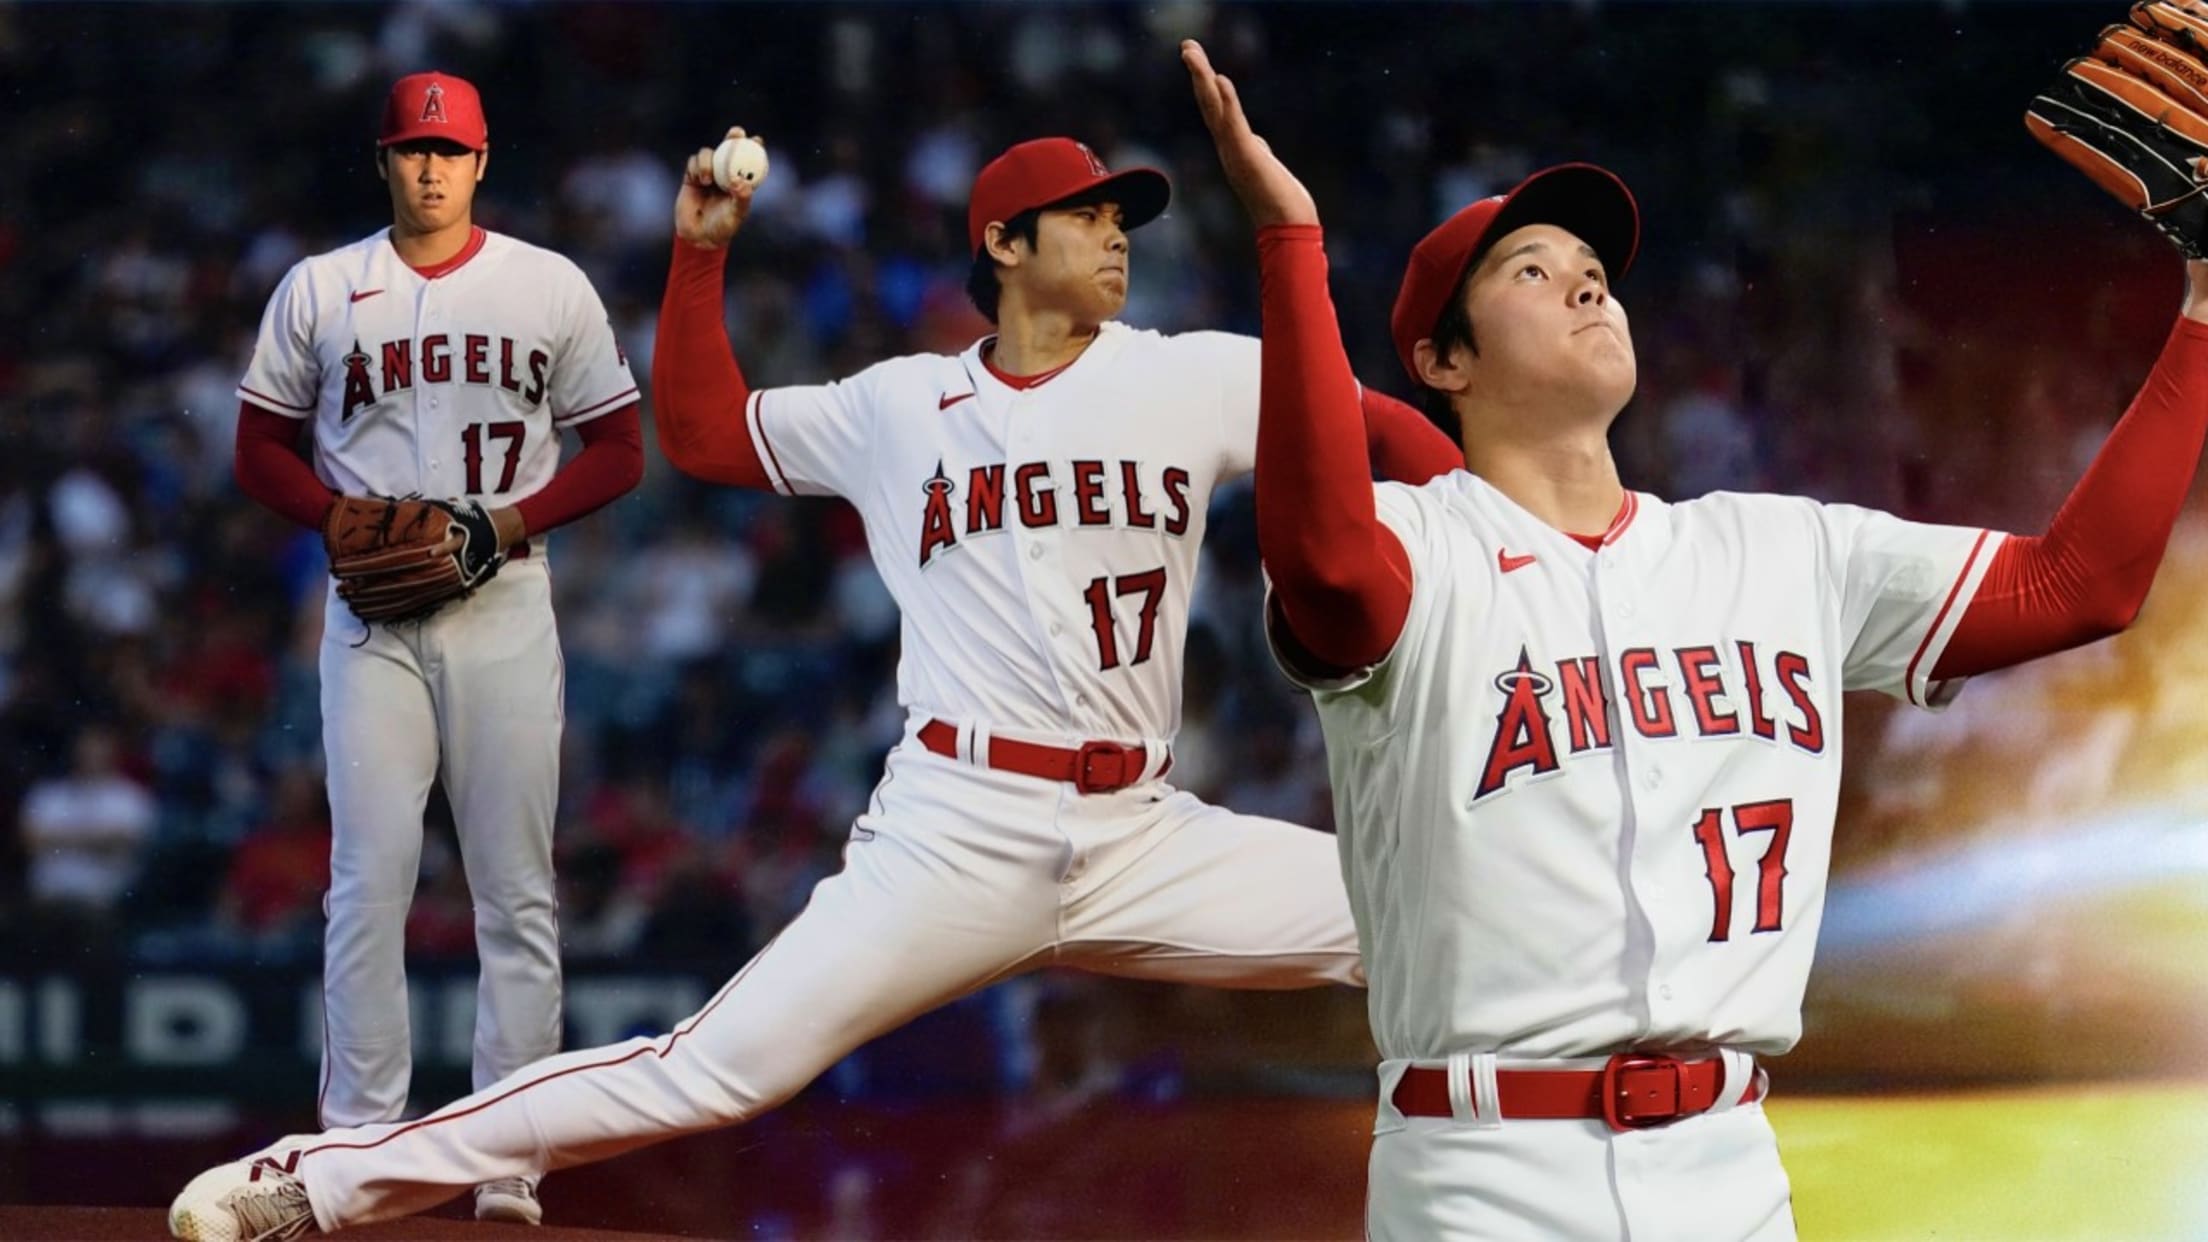 A composite image showing Shohei Ohtani in the set position, delivering a pitch and looking up, arms raised in celebration